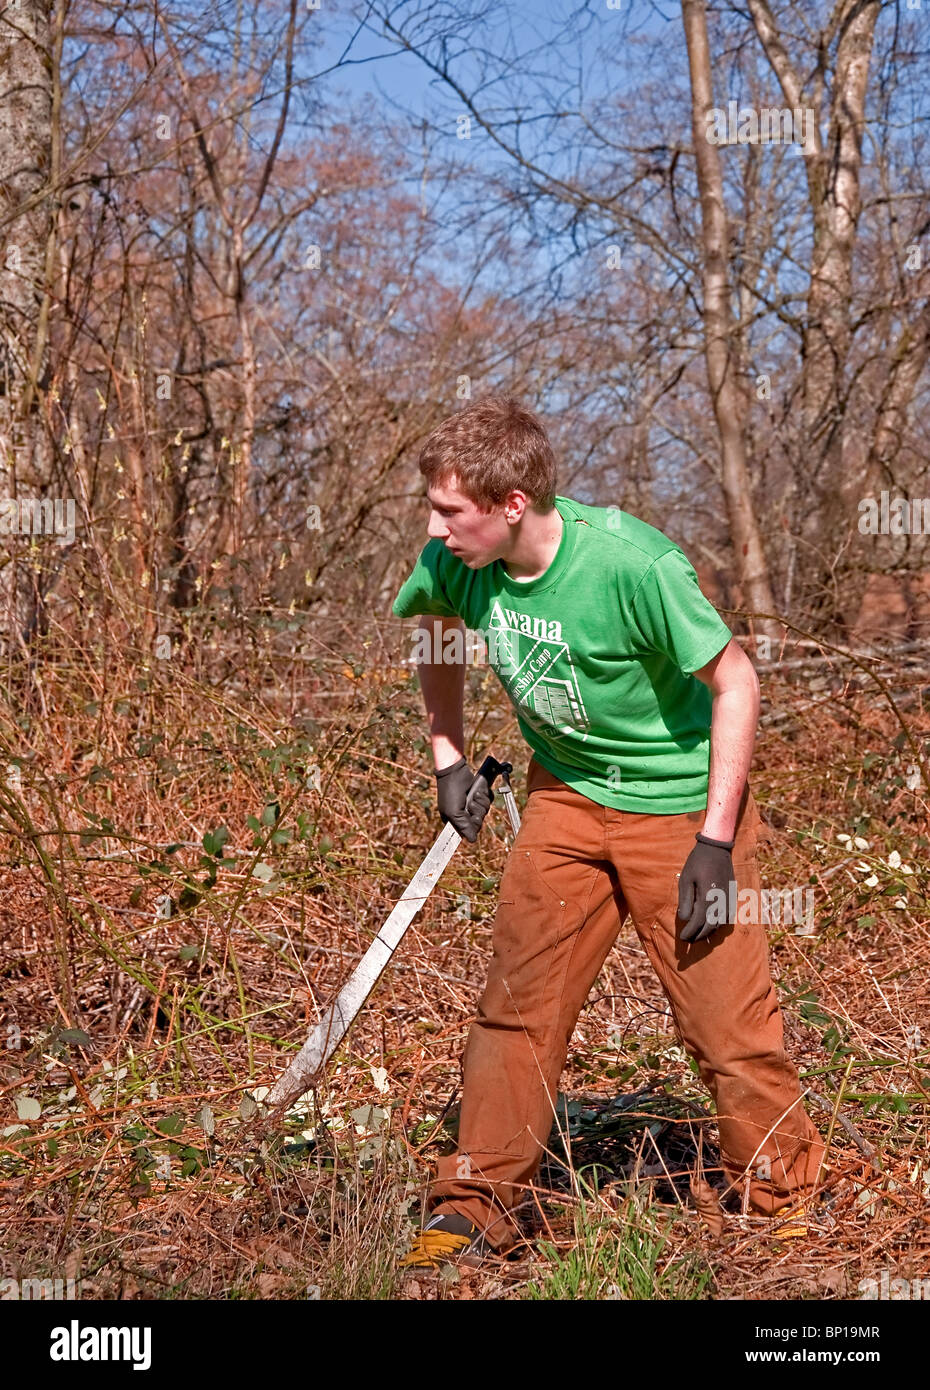 This young Caucasian man in his early twenties is working hard to clear brush off the land with a machete knife. Stock Photo